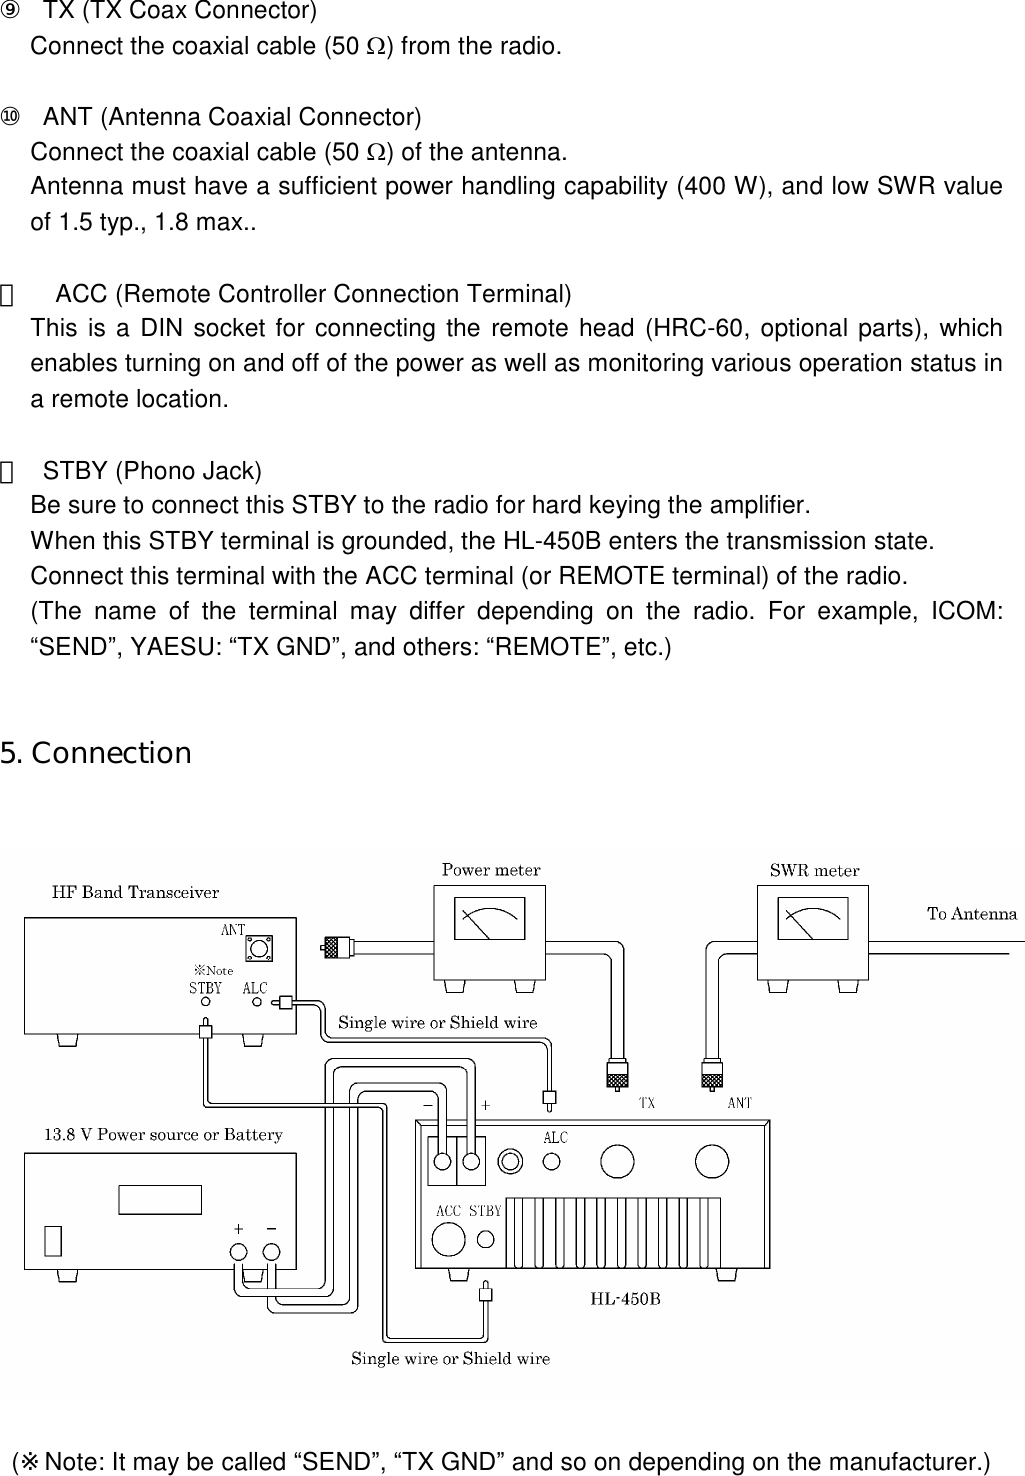 ⑨  TX (TX Coax Connector) Connect the coaxial cable (50 ) from the radio.  ⑩  ANT (Antenna Coaxial Connector) Connect the coaxial cable (50 ) of the antenna. Antenna must have a sufficient power handling capability (400 W), and low SWR value of 1.5 typ., 1.8 max..  ⑪    ACC (Remote Controller Connection Terminal) This is a DIN socket for connecting the remote head (HRC-60, optional parts), which enables turning on and off of the power as well as monitoring various operation status in a remote location.  ⑫  STBY (Phono Jack) Be sure to connect this STBY to the radio for hard keying the amplifier. When this STBY terminal is grounded, the HL-450B enters the transmission state. Connect this terminal with the ACC terminal (or REMOTE terminal) of the radio. (The  name  of  the  terminal  may  differ  depending  on  the  radio.  For  example,  ICOM: “SEND”, YAESU: “TX GND”, and others: “REMOTE”, etc.)   5. Connection       (※Note: It may be called “SEND”, “TX GND” and so on depending on the manufacturer.) 